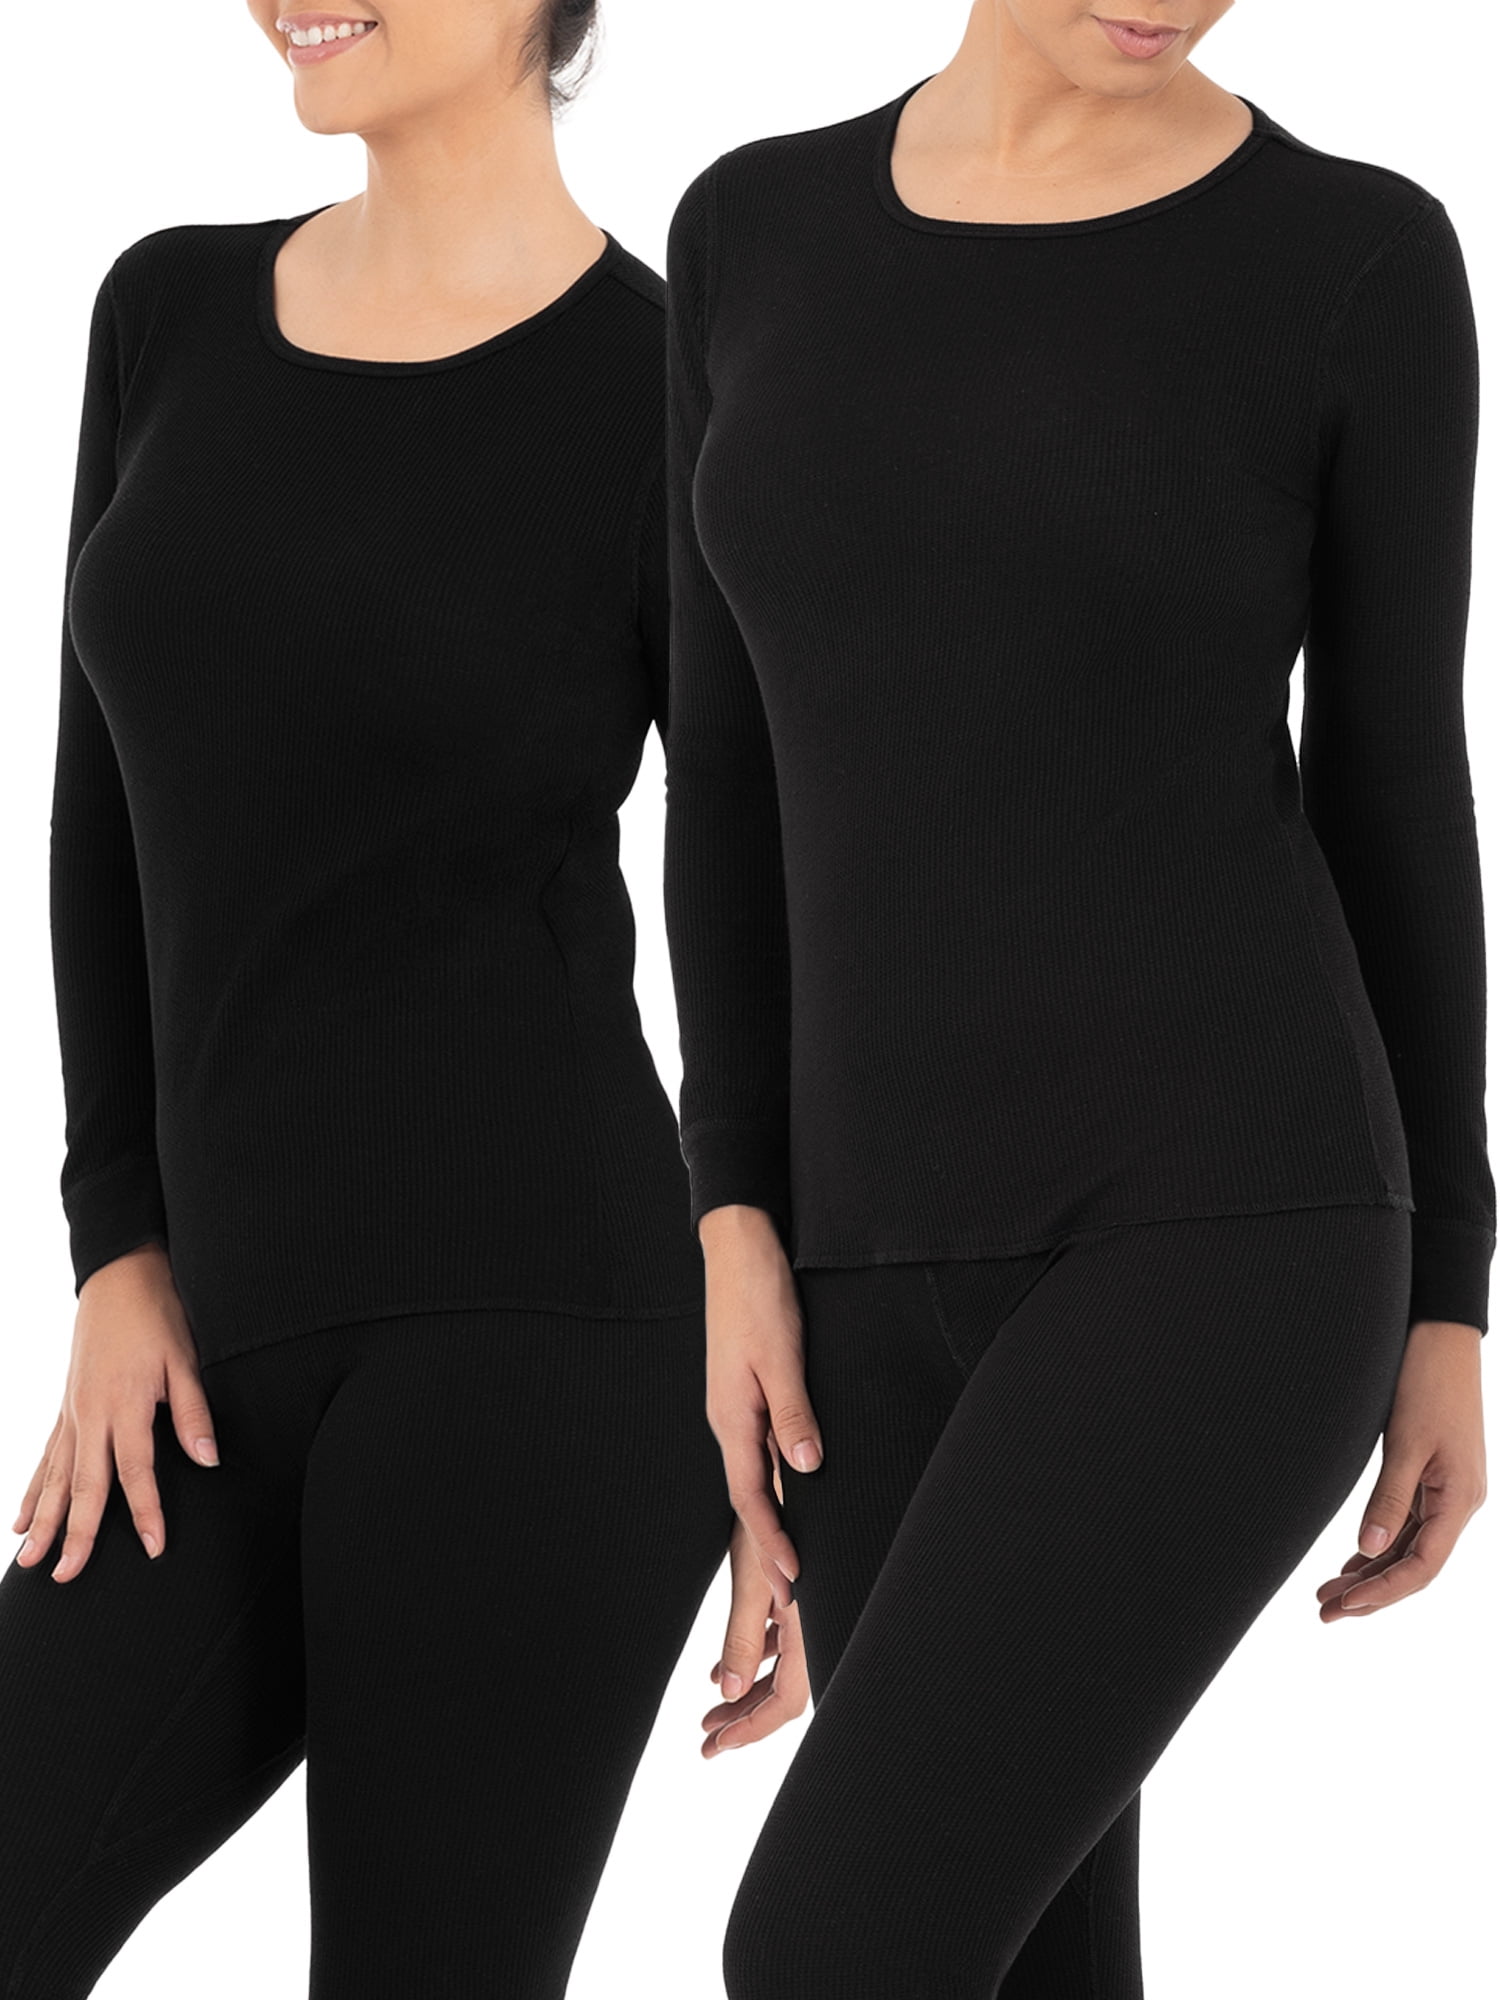 Fruit of the Loom Womens Plus Size Fit for Me Core Performance Thermal Top